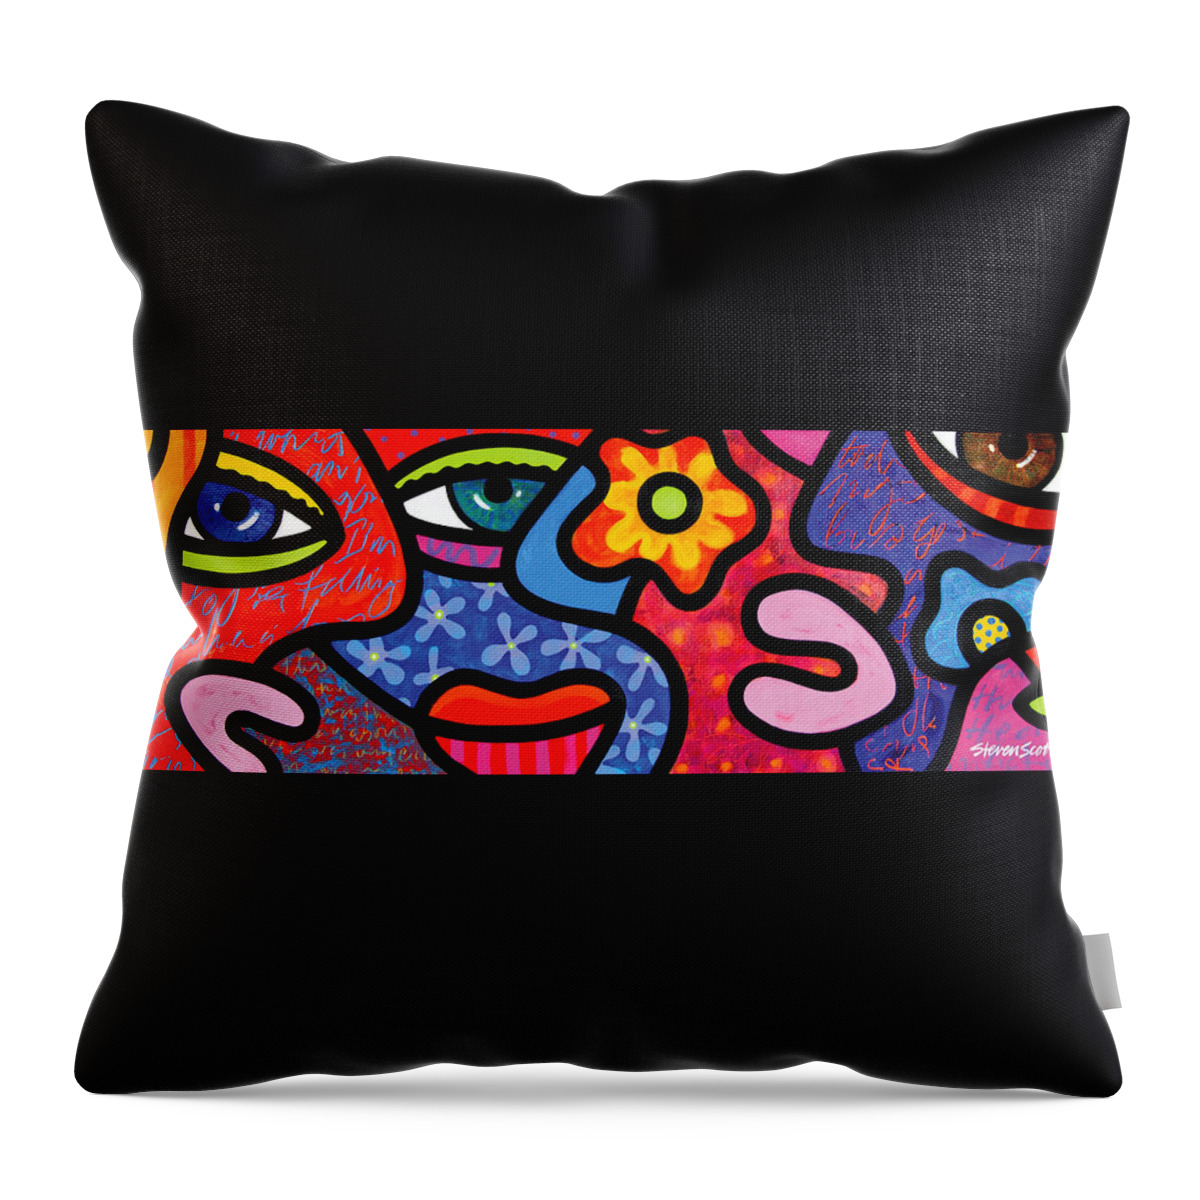 Eyes Throw Pillow featuring the painting Gossip by Steven Scott